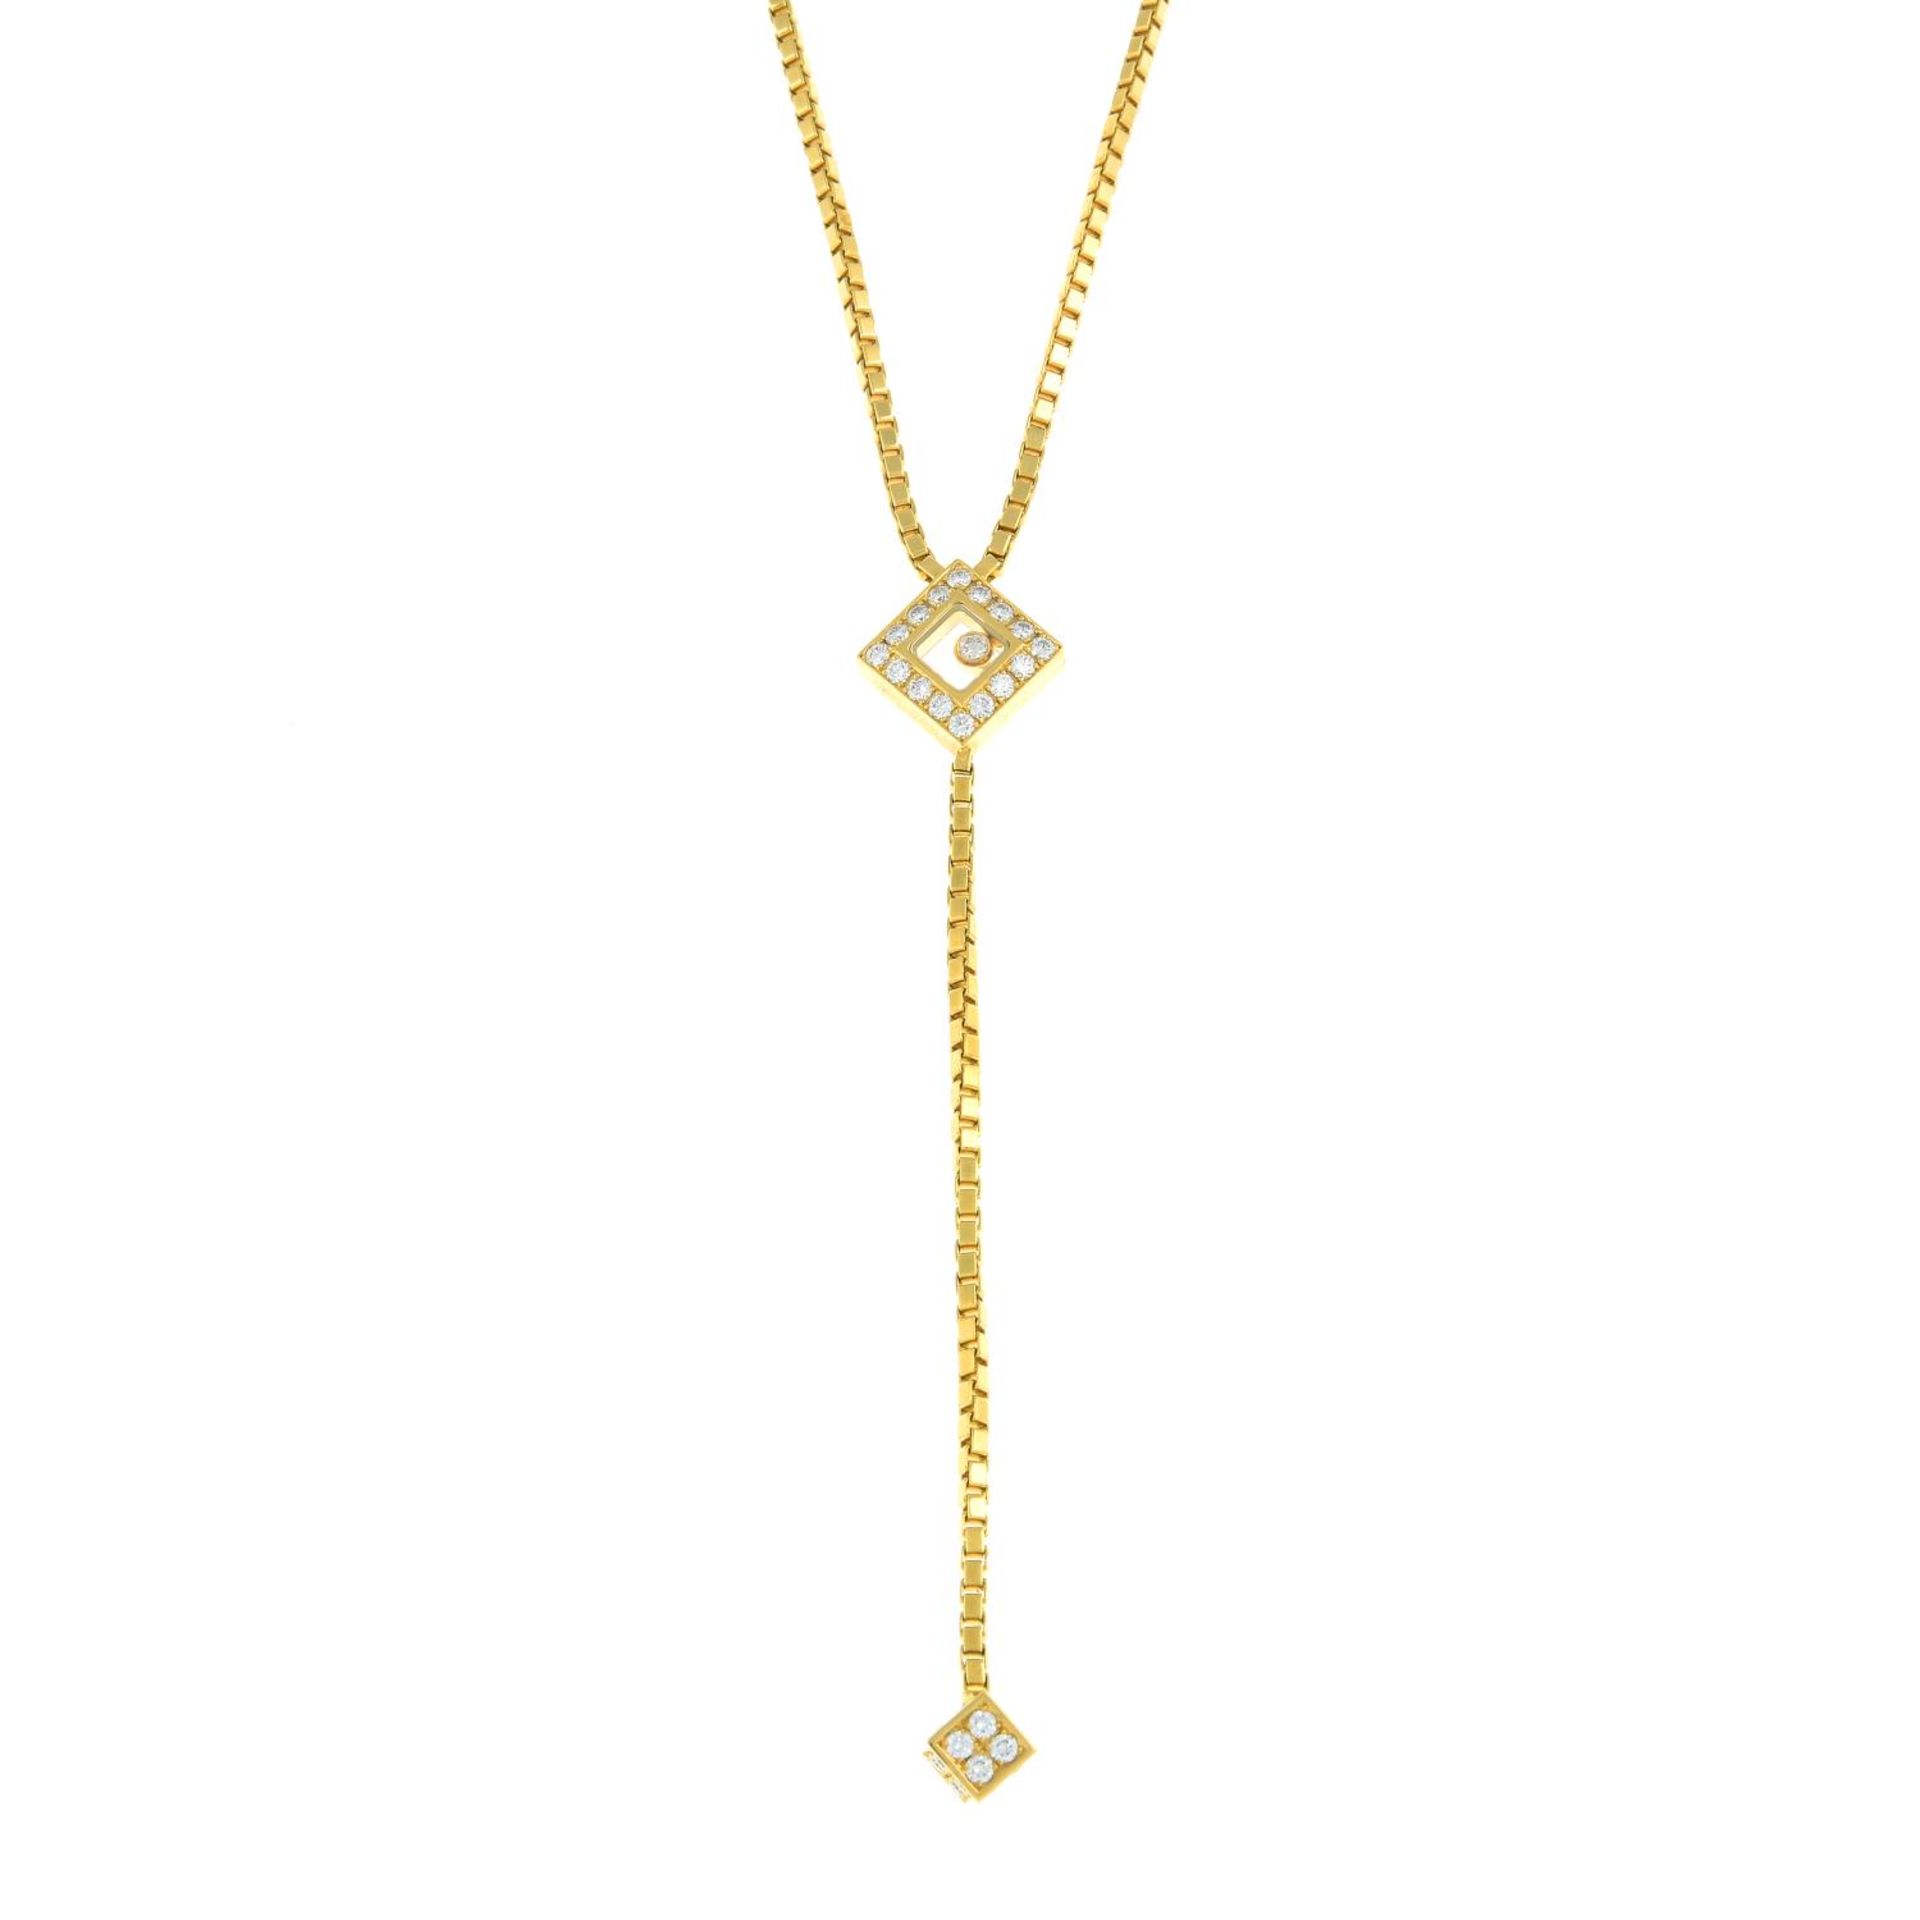 A 'Happy Diamonds' necklace, by Chopard. - Image 2 of 8